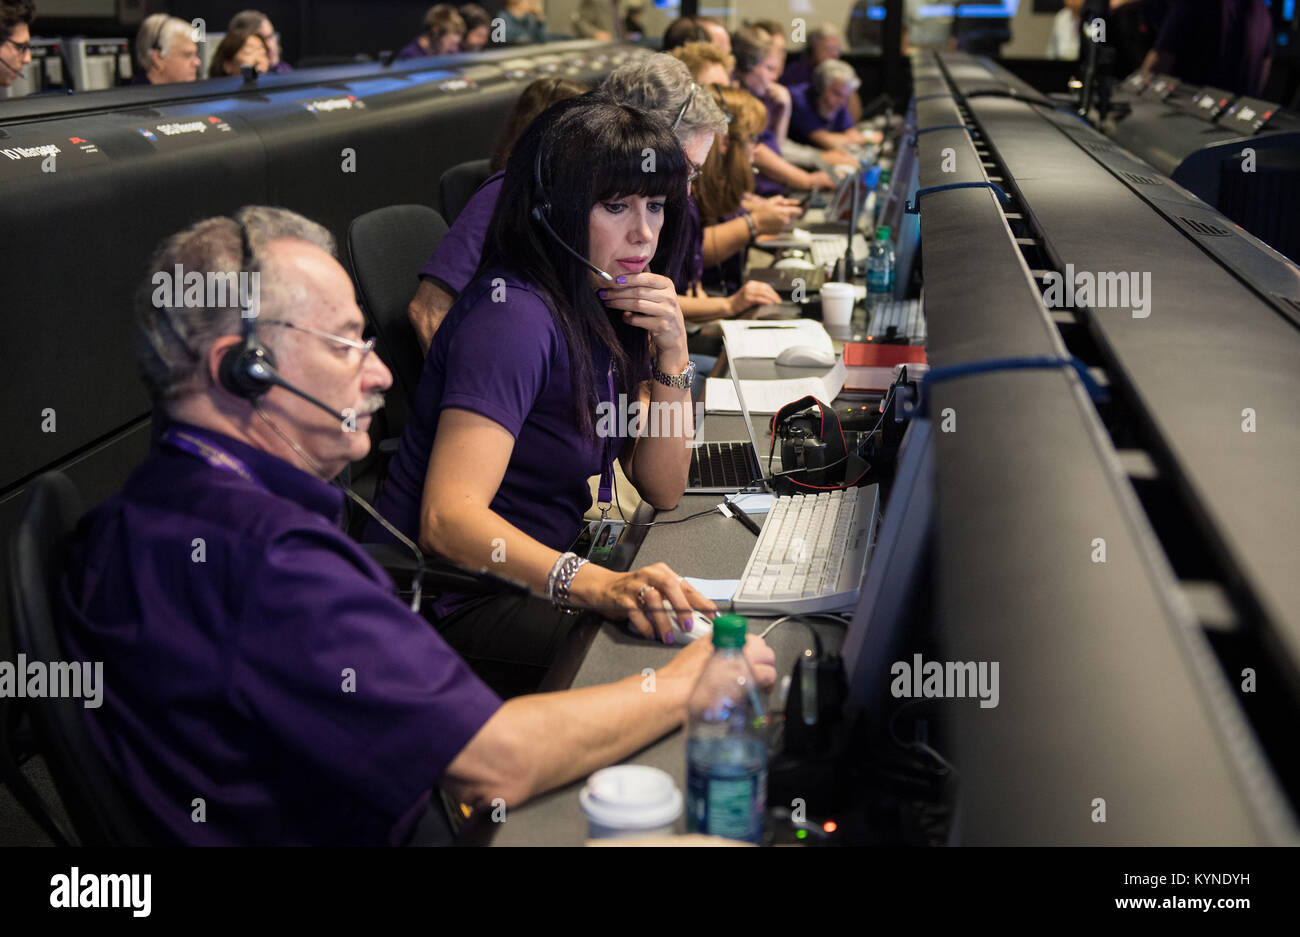 Aseel Anabtawi, of Cassini's radio science team, monitors her console in mission control during Cassini's final plunge into Saturn, Friday, Sept. 15, 2017 at NASA's Jet Propulsion Laboratory in Pasadena, California. Since its arrival in 2004, the Cassini-Huygens mission has been a discovery machine, revolutionizing our knowledge of the Saturn system and captivating us with data and images never before obtained with such detail and clarity. On Sept. 15, 2017, operators deliberately plunged the spacecraft into Saturn, as Cassini gathered science until the end. Loss of contact with the Cassini sp Stock Photo